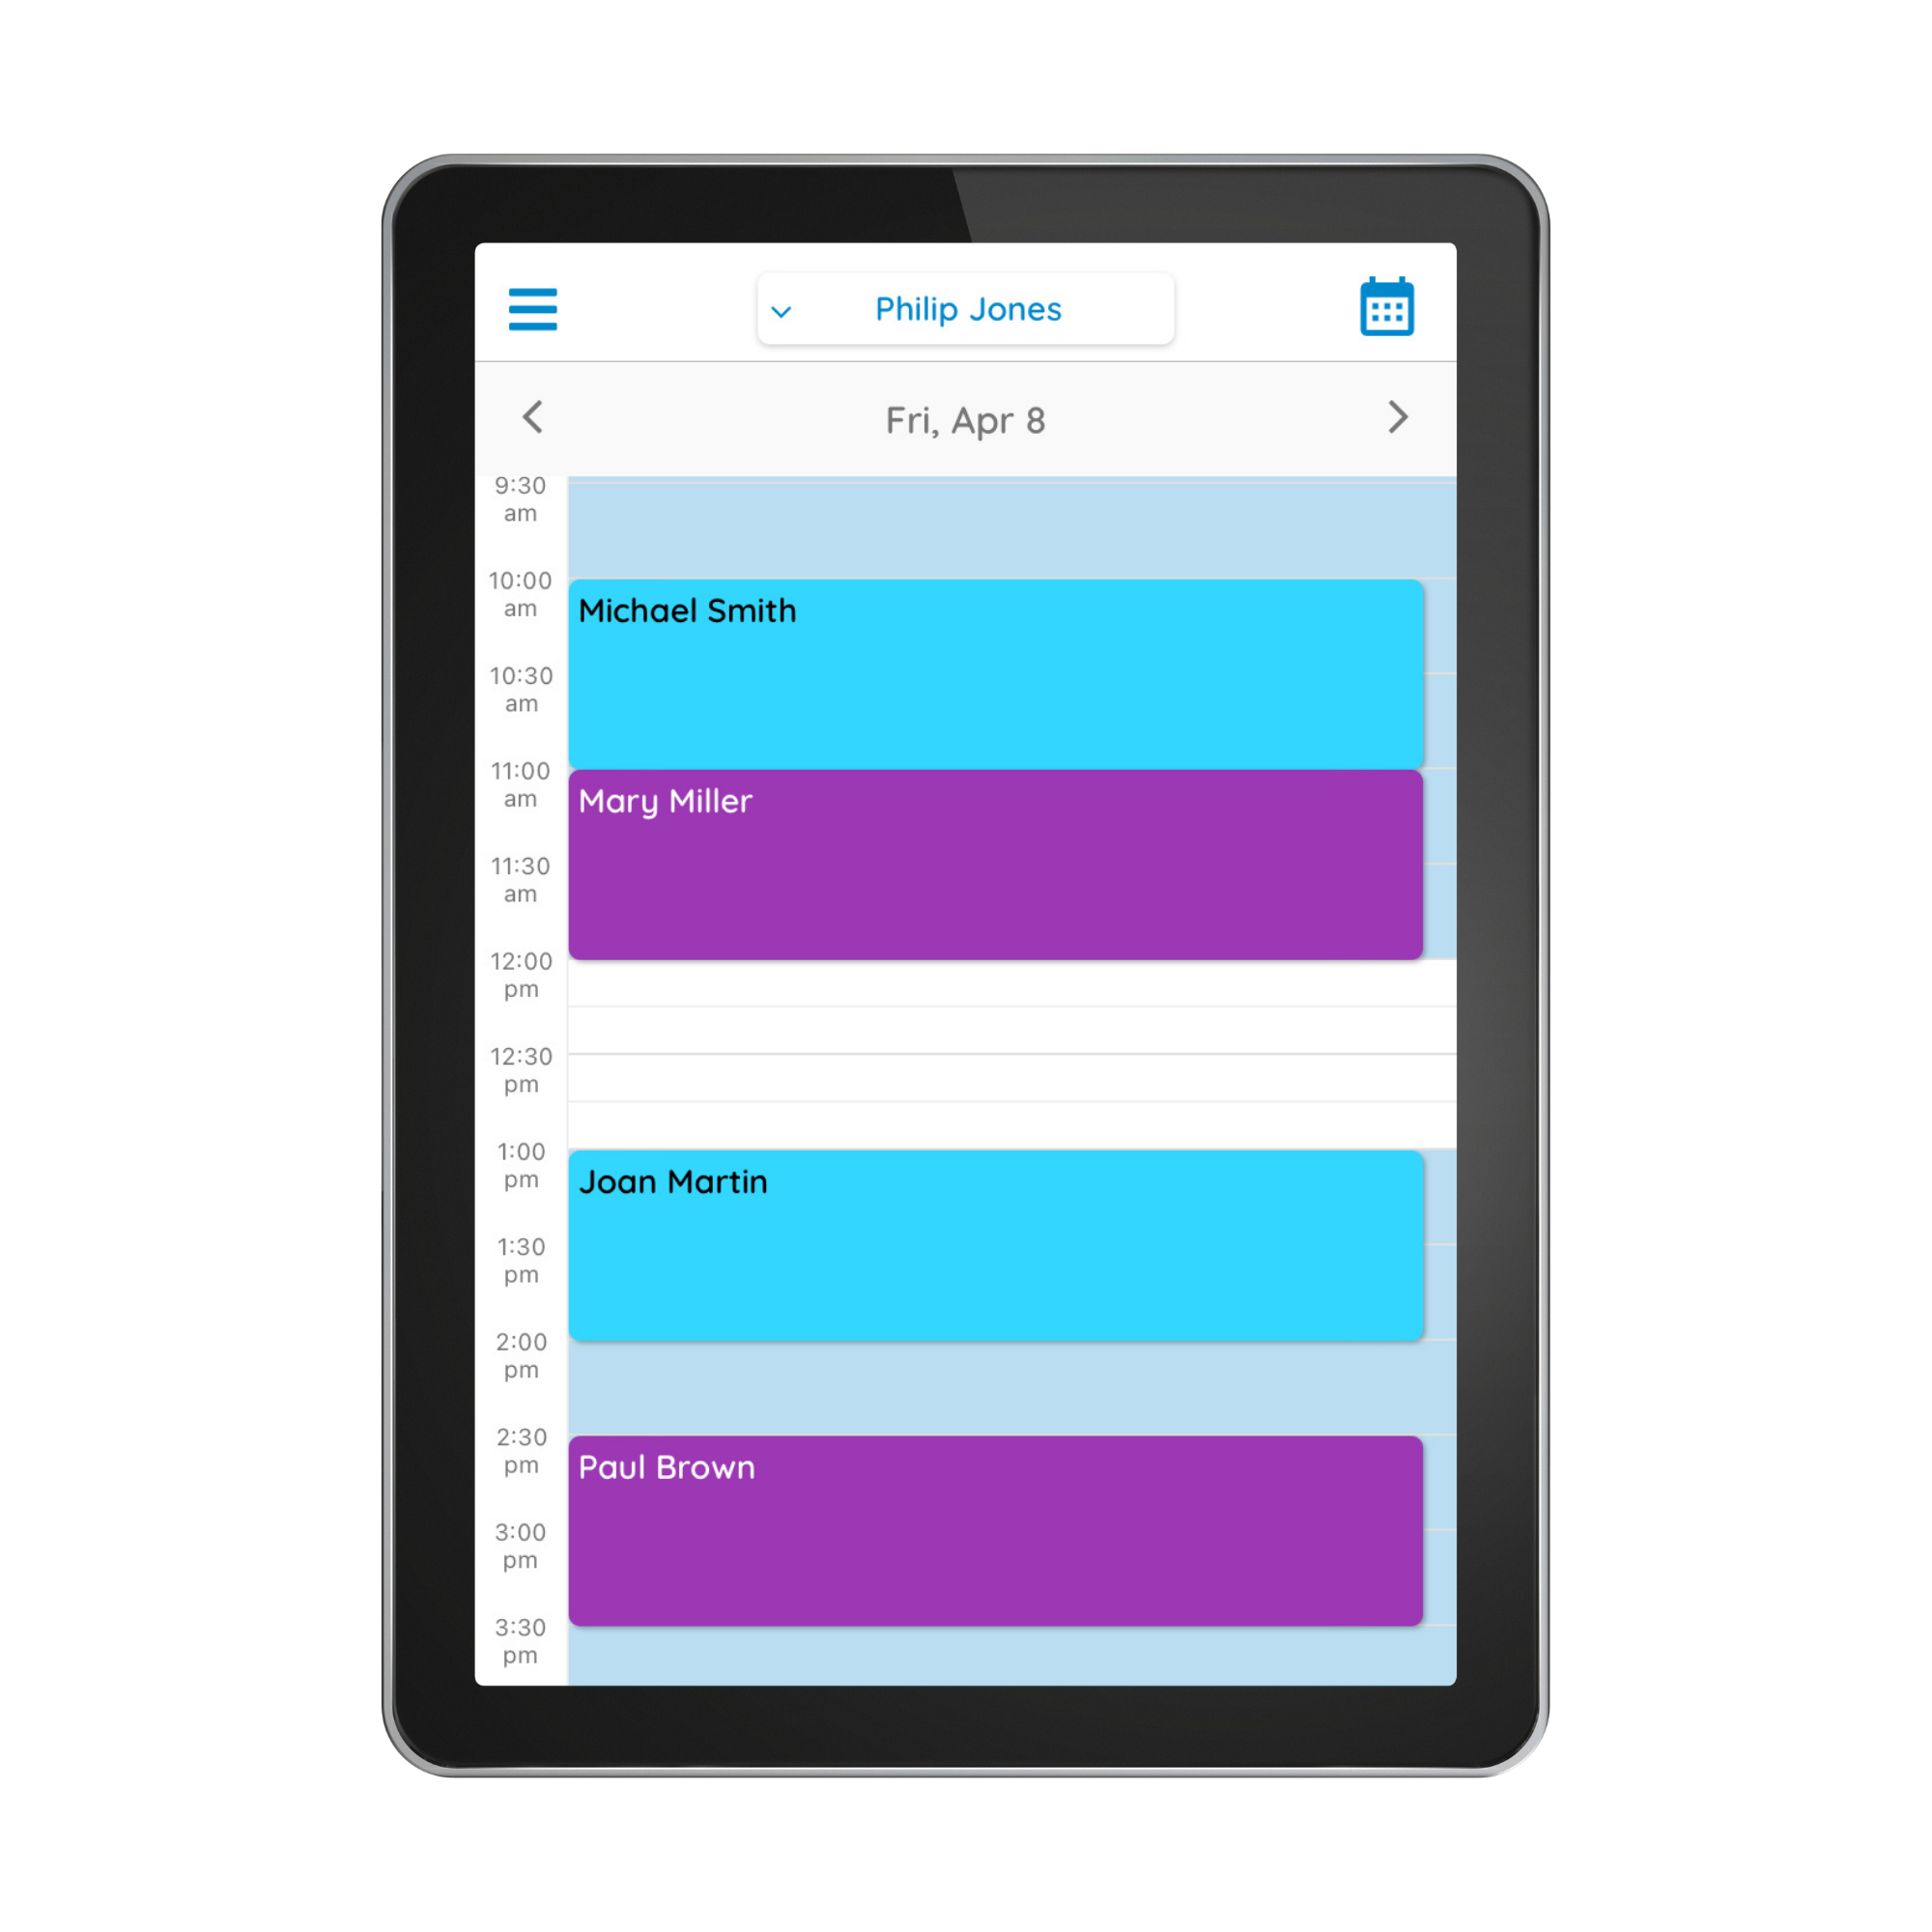 A professional's GOrendezvous schedule as seen on the mobile app from a tablet